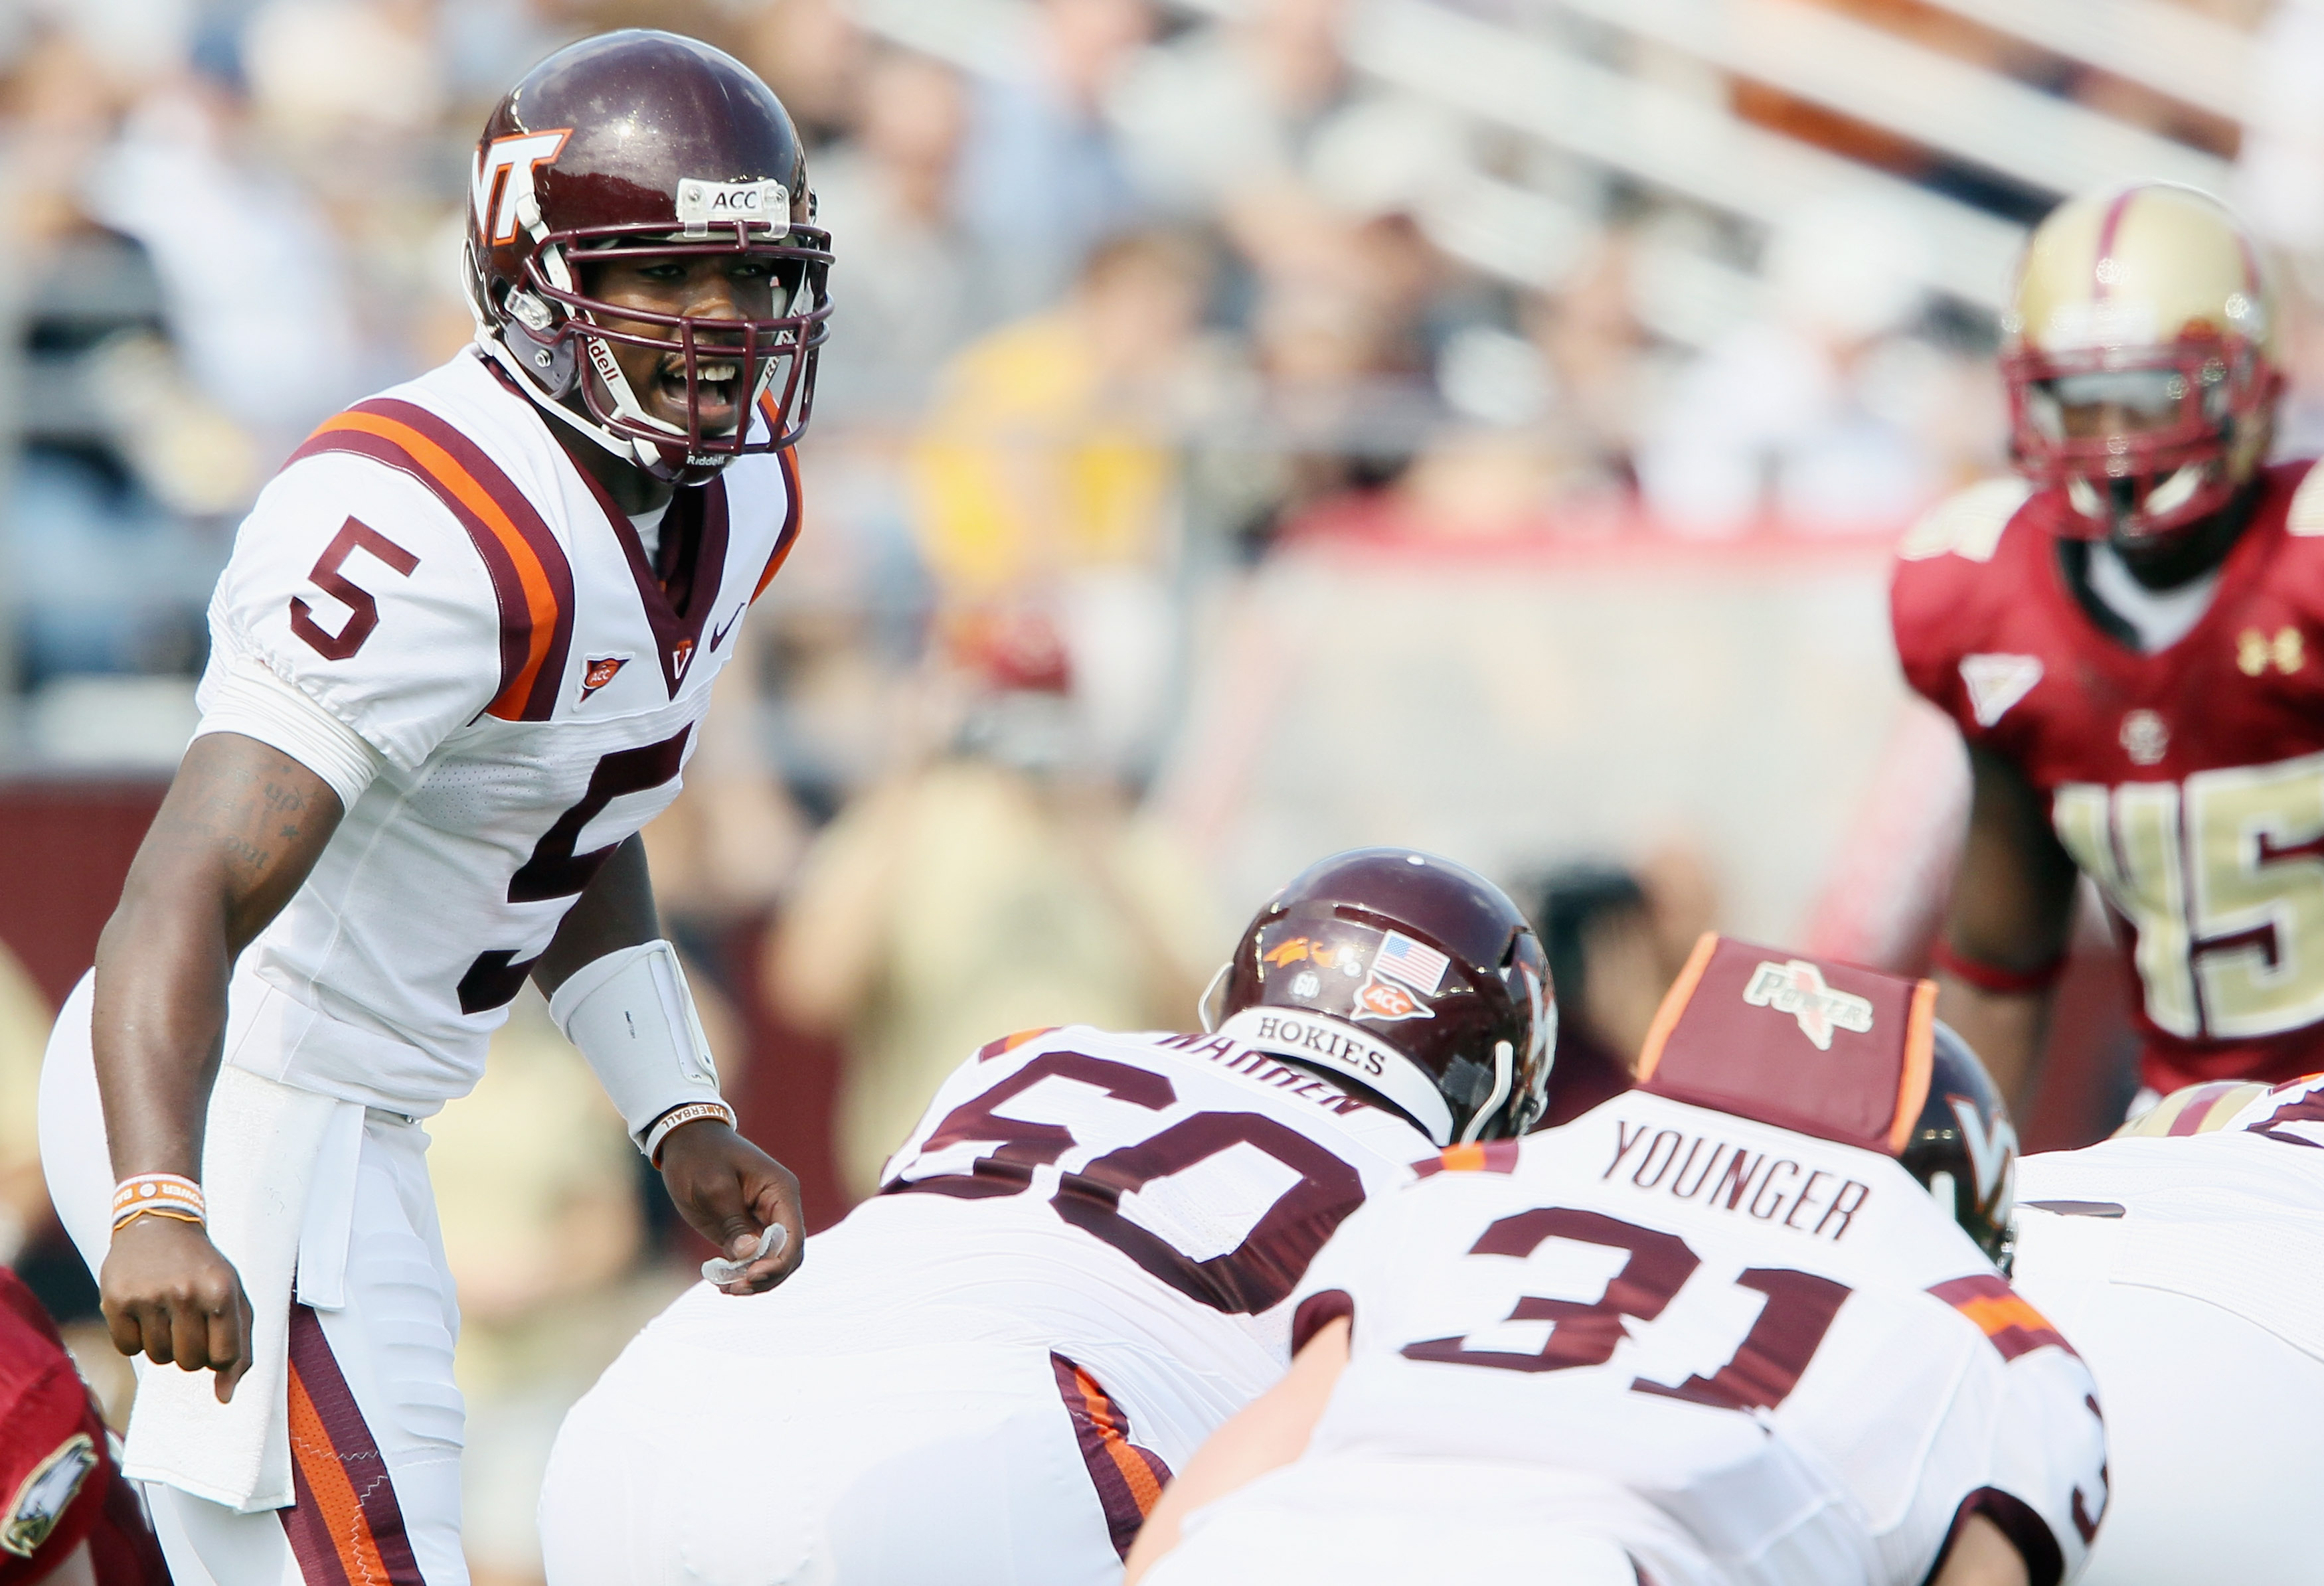 CHESTNUT HILL, MA - SEPTEMBER 25:  Tyrod Taylor #5 of the Virginia Tech Hokies calls out the play in the first quarter against the Boston College Eagles on September 25, 2010 at Alumni Stadium in Chestnut Hill, Massachusetts.  (Photo by Elsa/Getty Images)